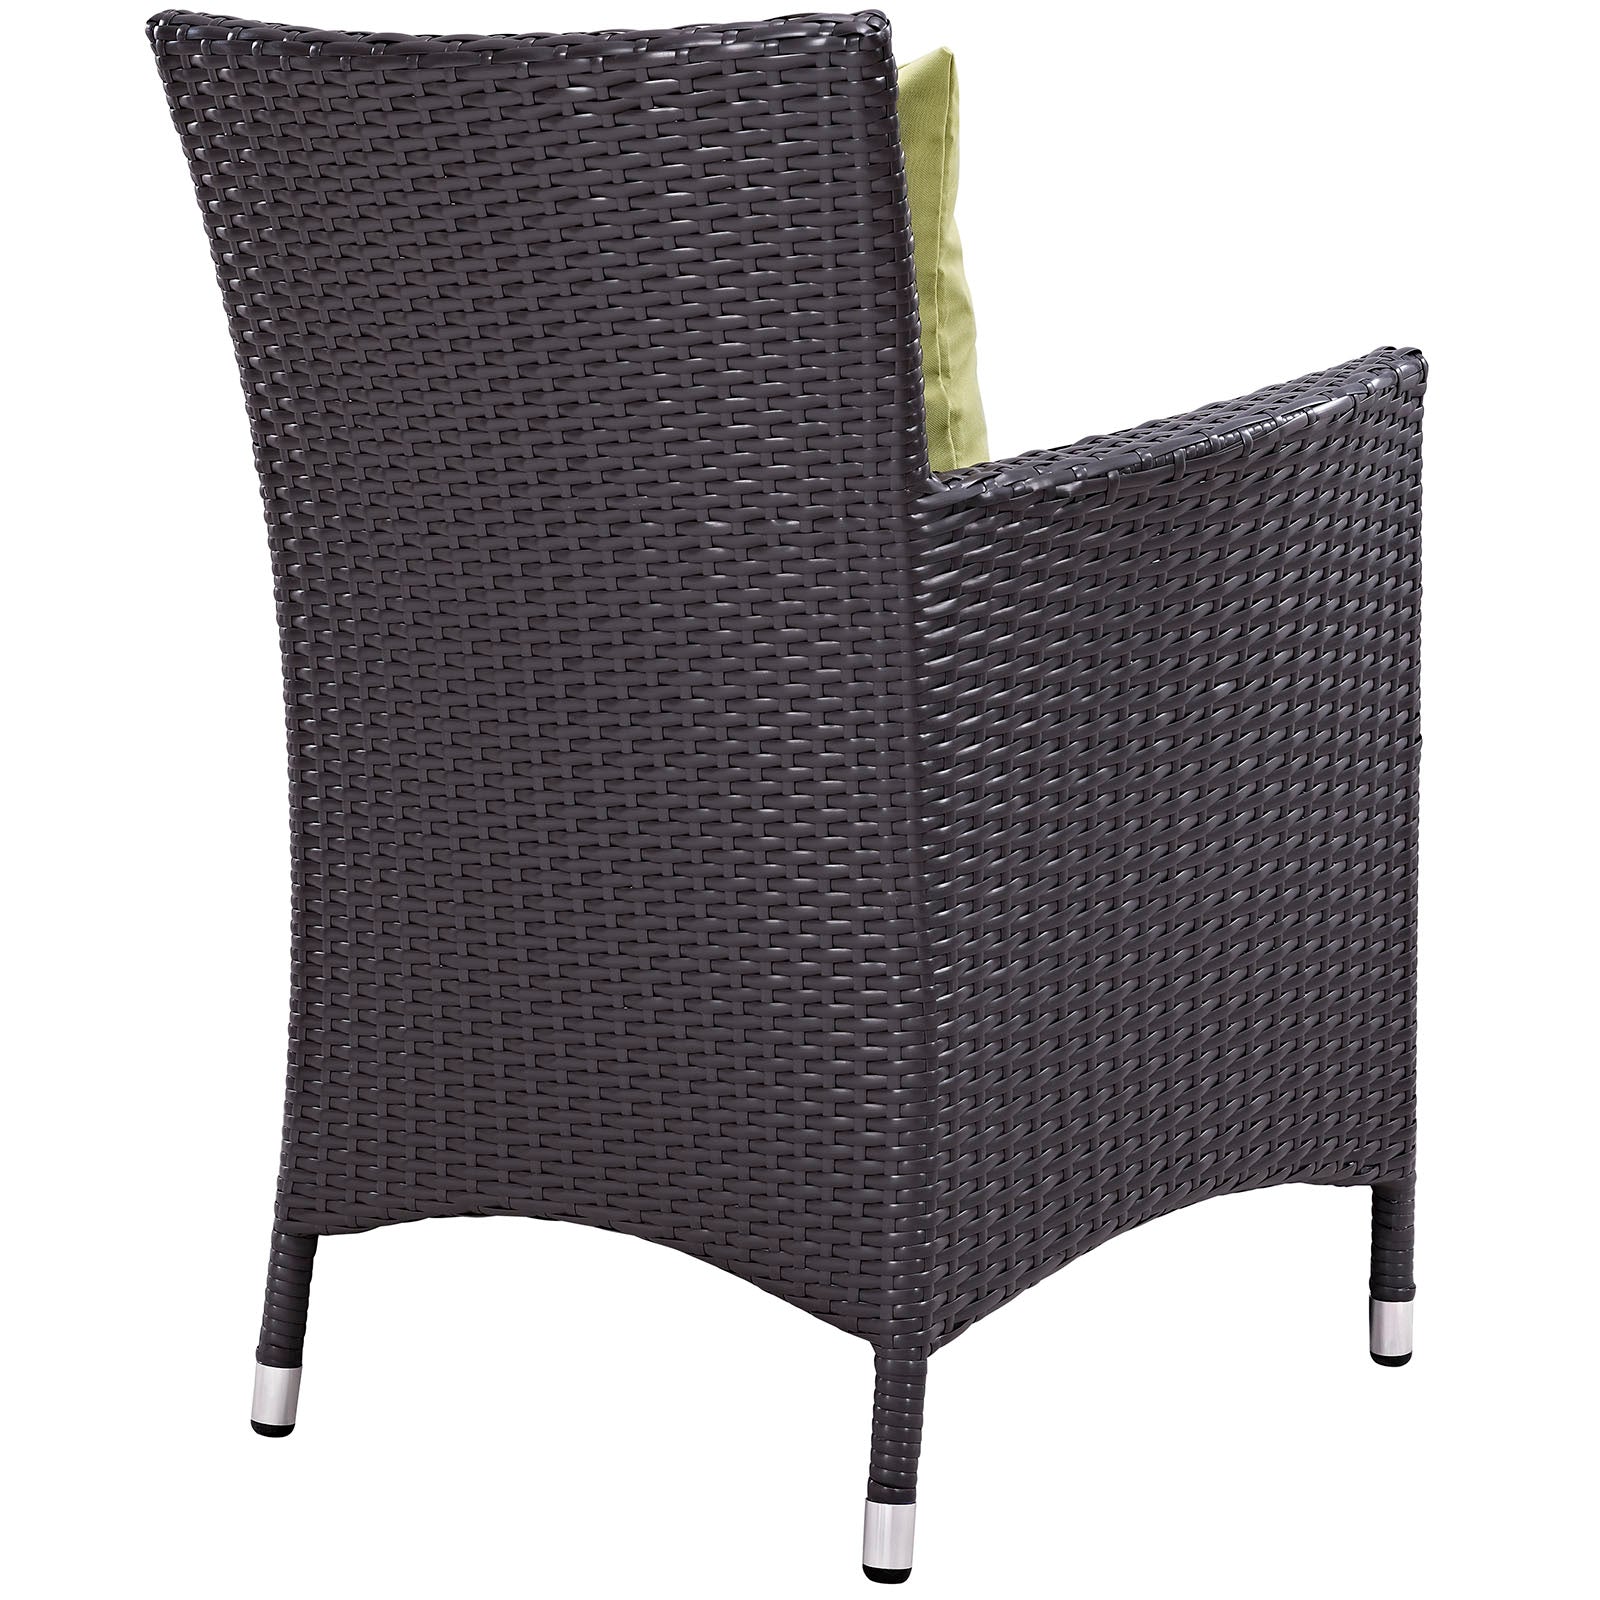 Modway Outdoor Dining Chairs - Convene Dining Outdoor Patio Armchair Espresso Peridot